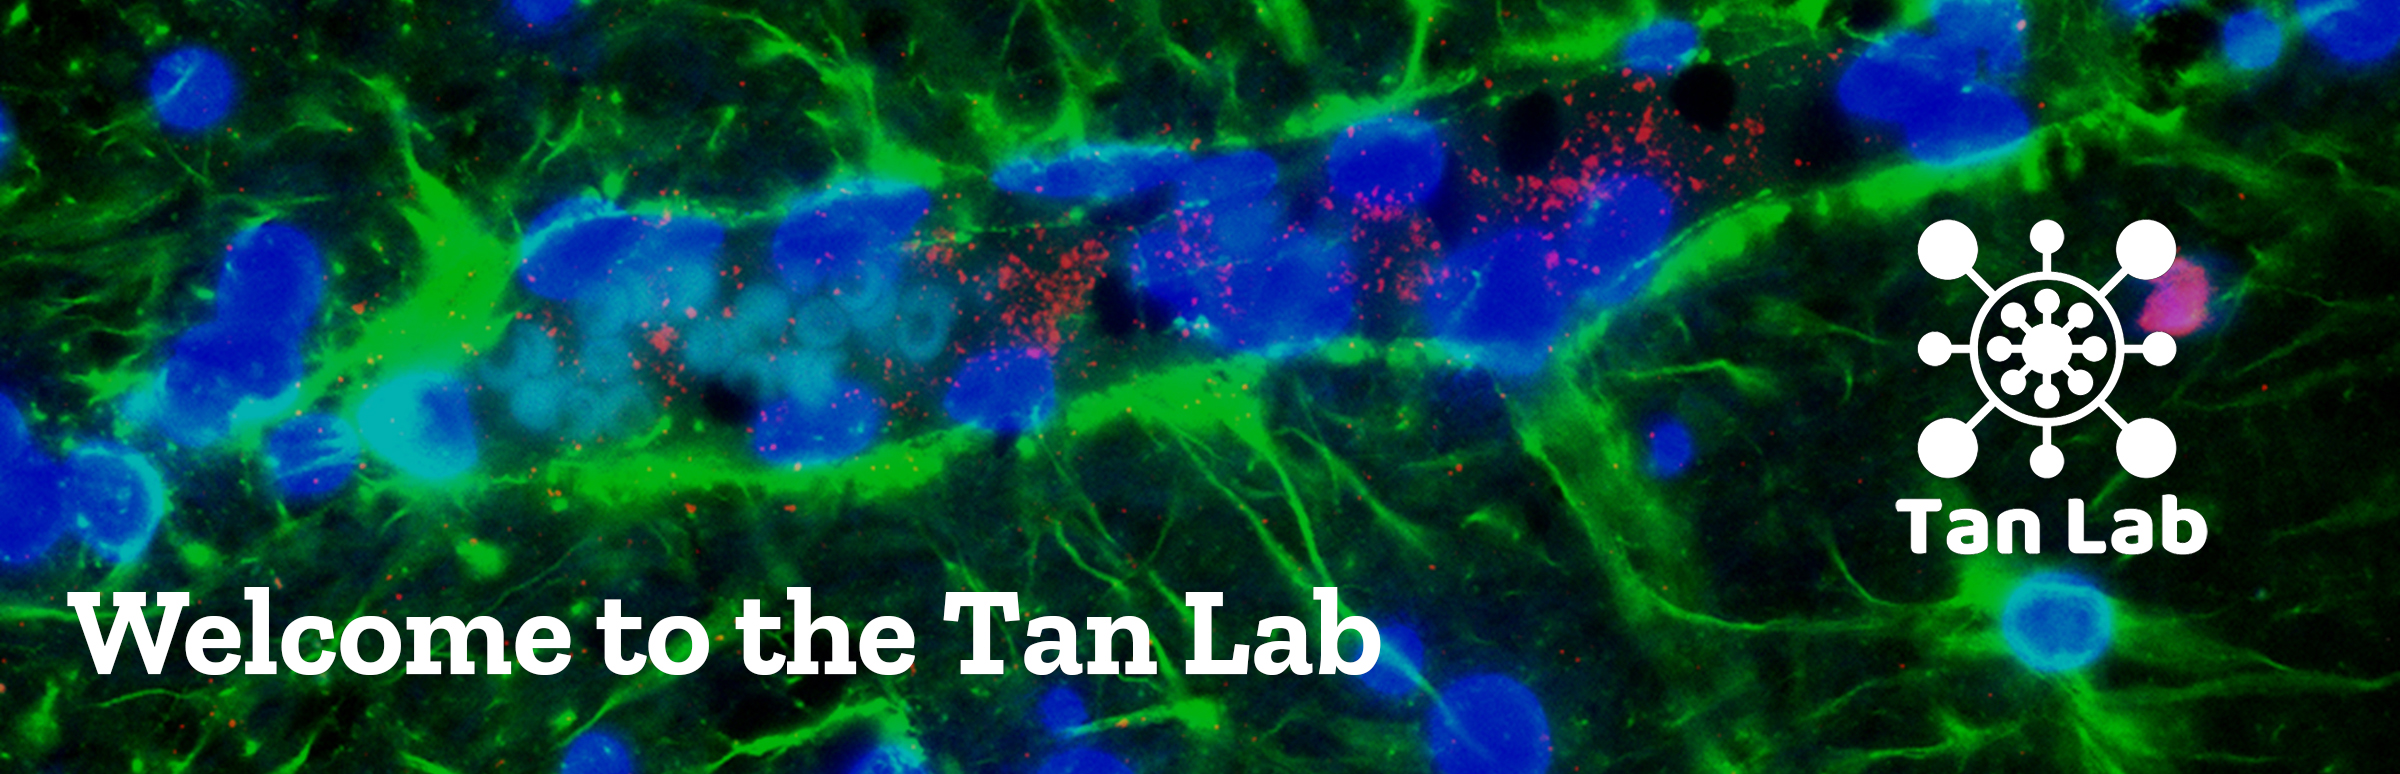 Welcome to the Tan Lab